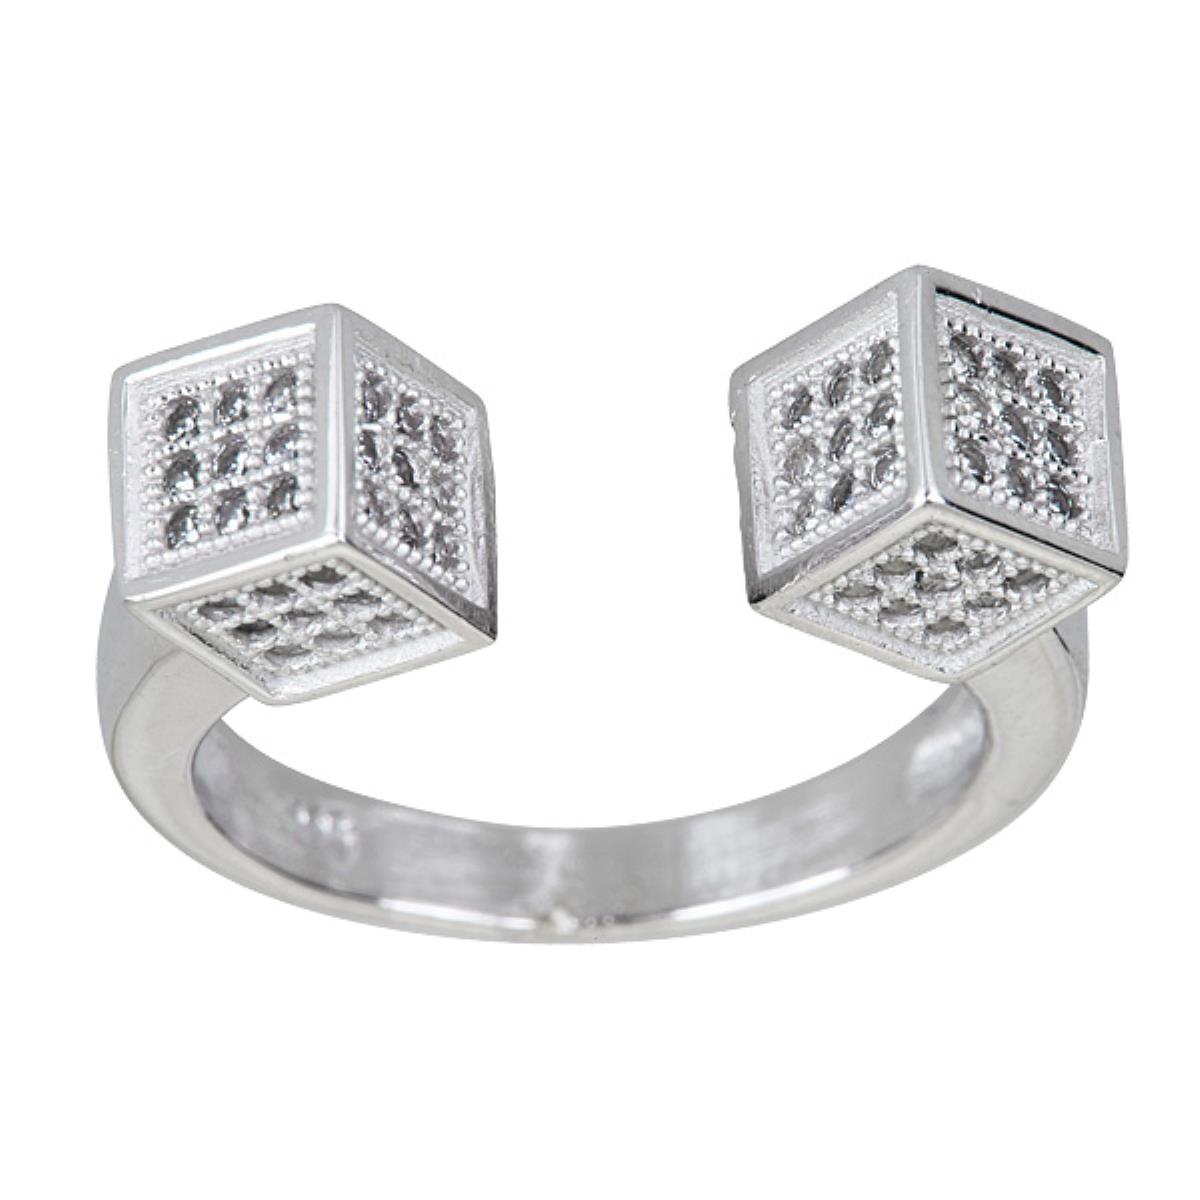 Sterling Silver Boxed Pave Trend Ring